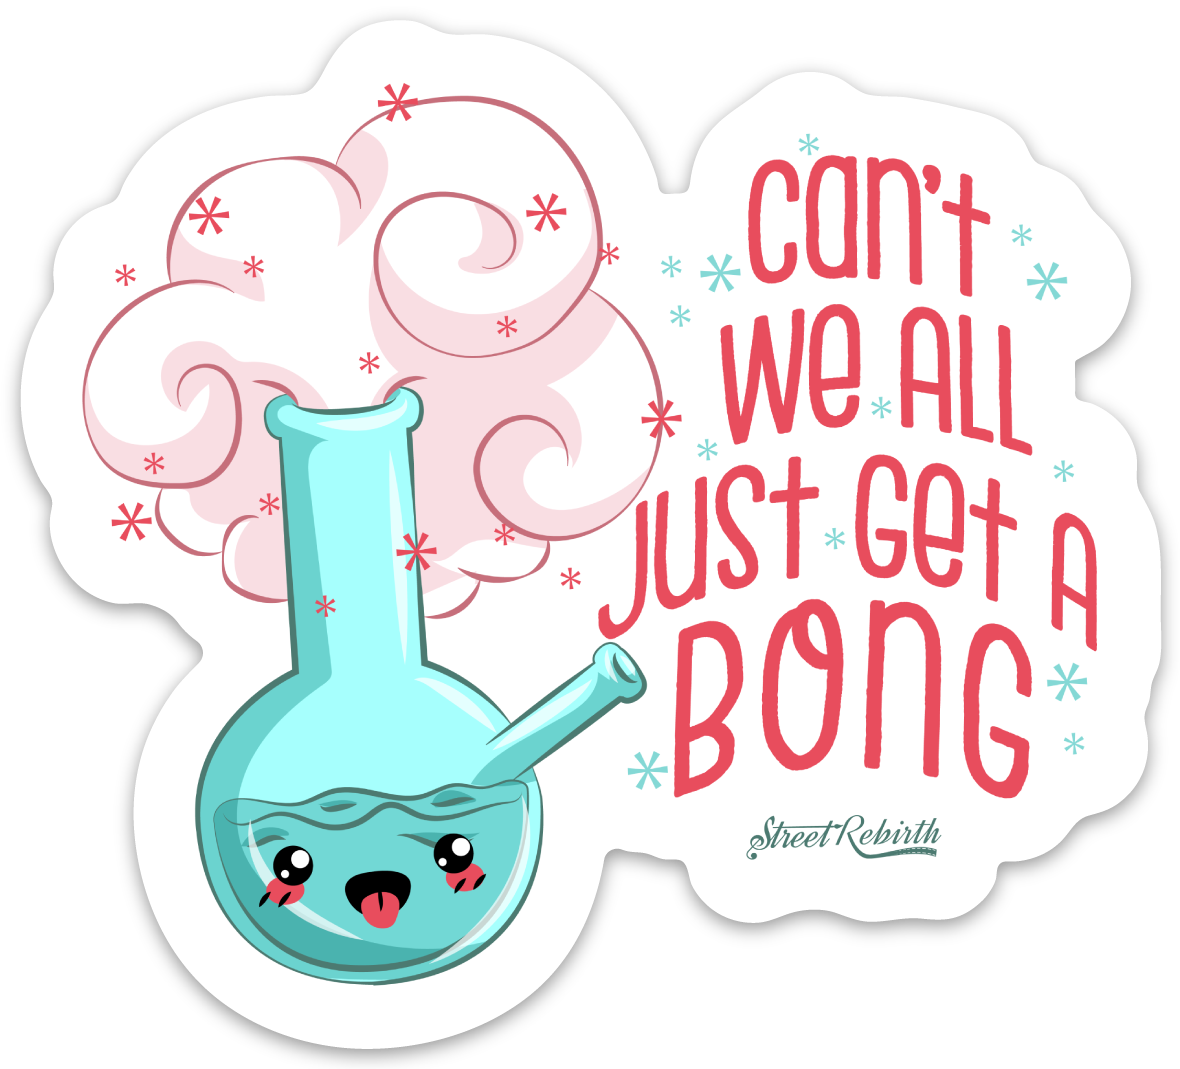 Can't We All Just Get a Bang PUN STICKER – ONE 4 INCH WATER PROOF VINYL STICKER – FOR HYDRO FLASK, SKATEBOARD, LAPTOP, PLANNER, CAR, COLLECTING, GIFTING